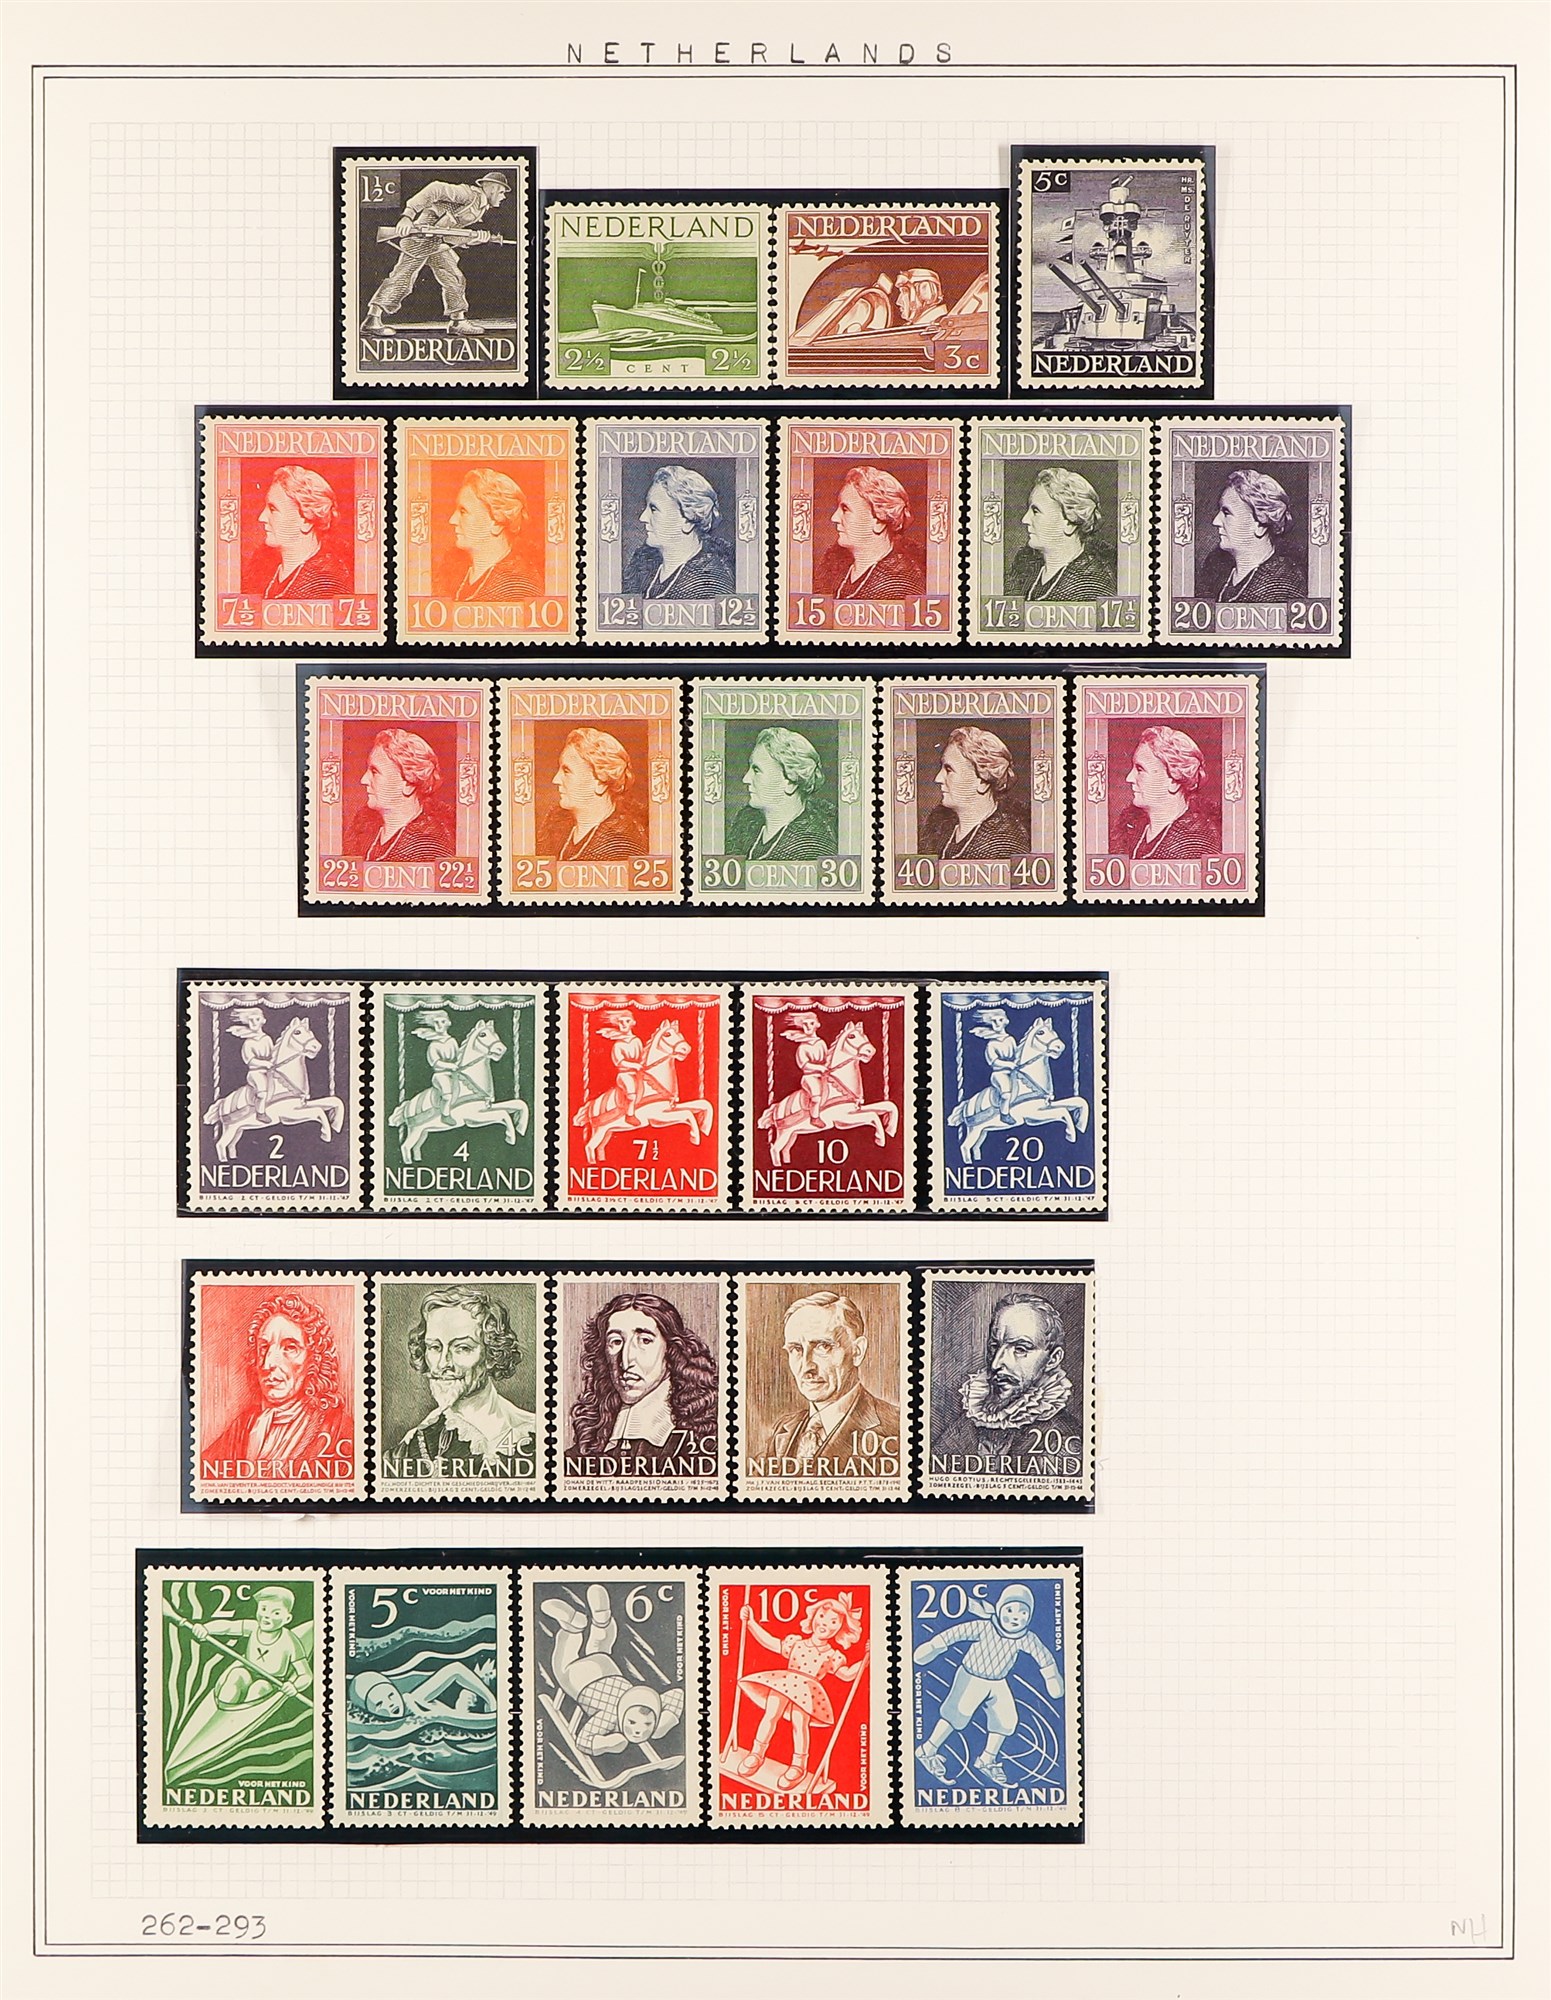 NETHERLANDS 1924 - 1967 NEVER HINGED MINT COLLECTION around 280 stamps on album pages, complete sets - Image 4 of 7